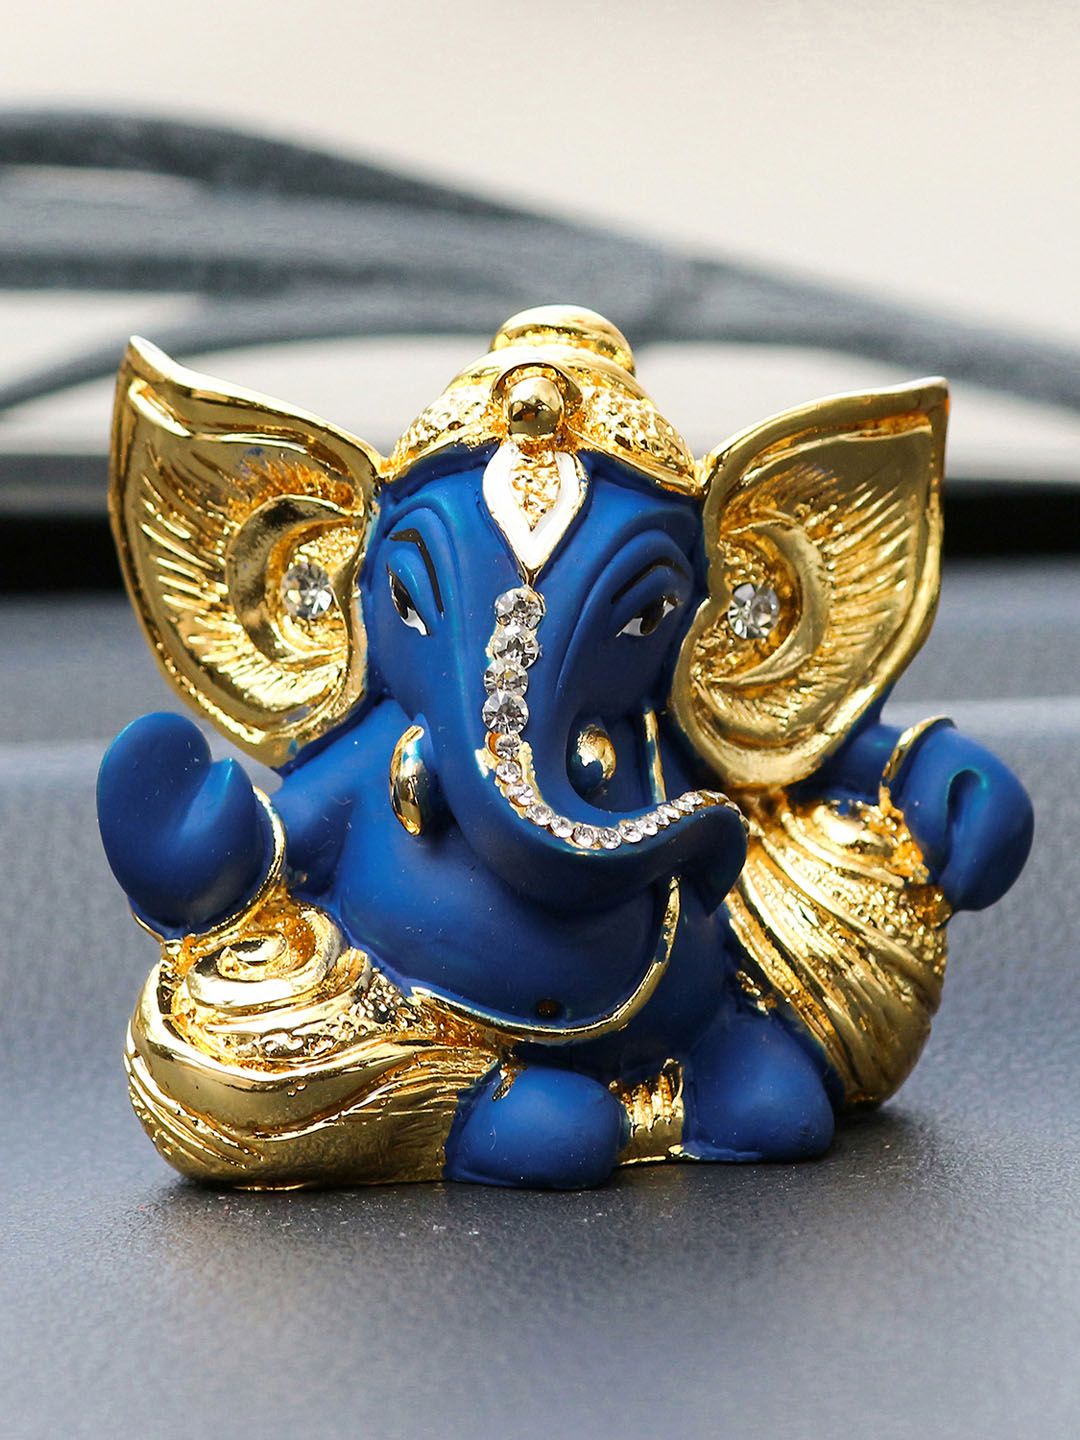 eCraftIndia Blue & Gold-Toned Handcrafted Lord Ganesha Idol Price in India